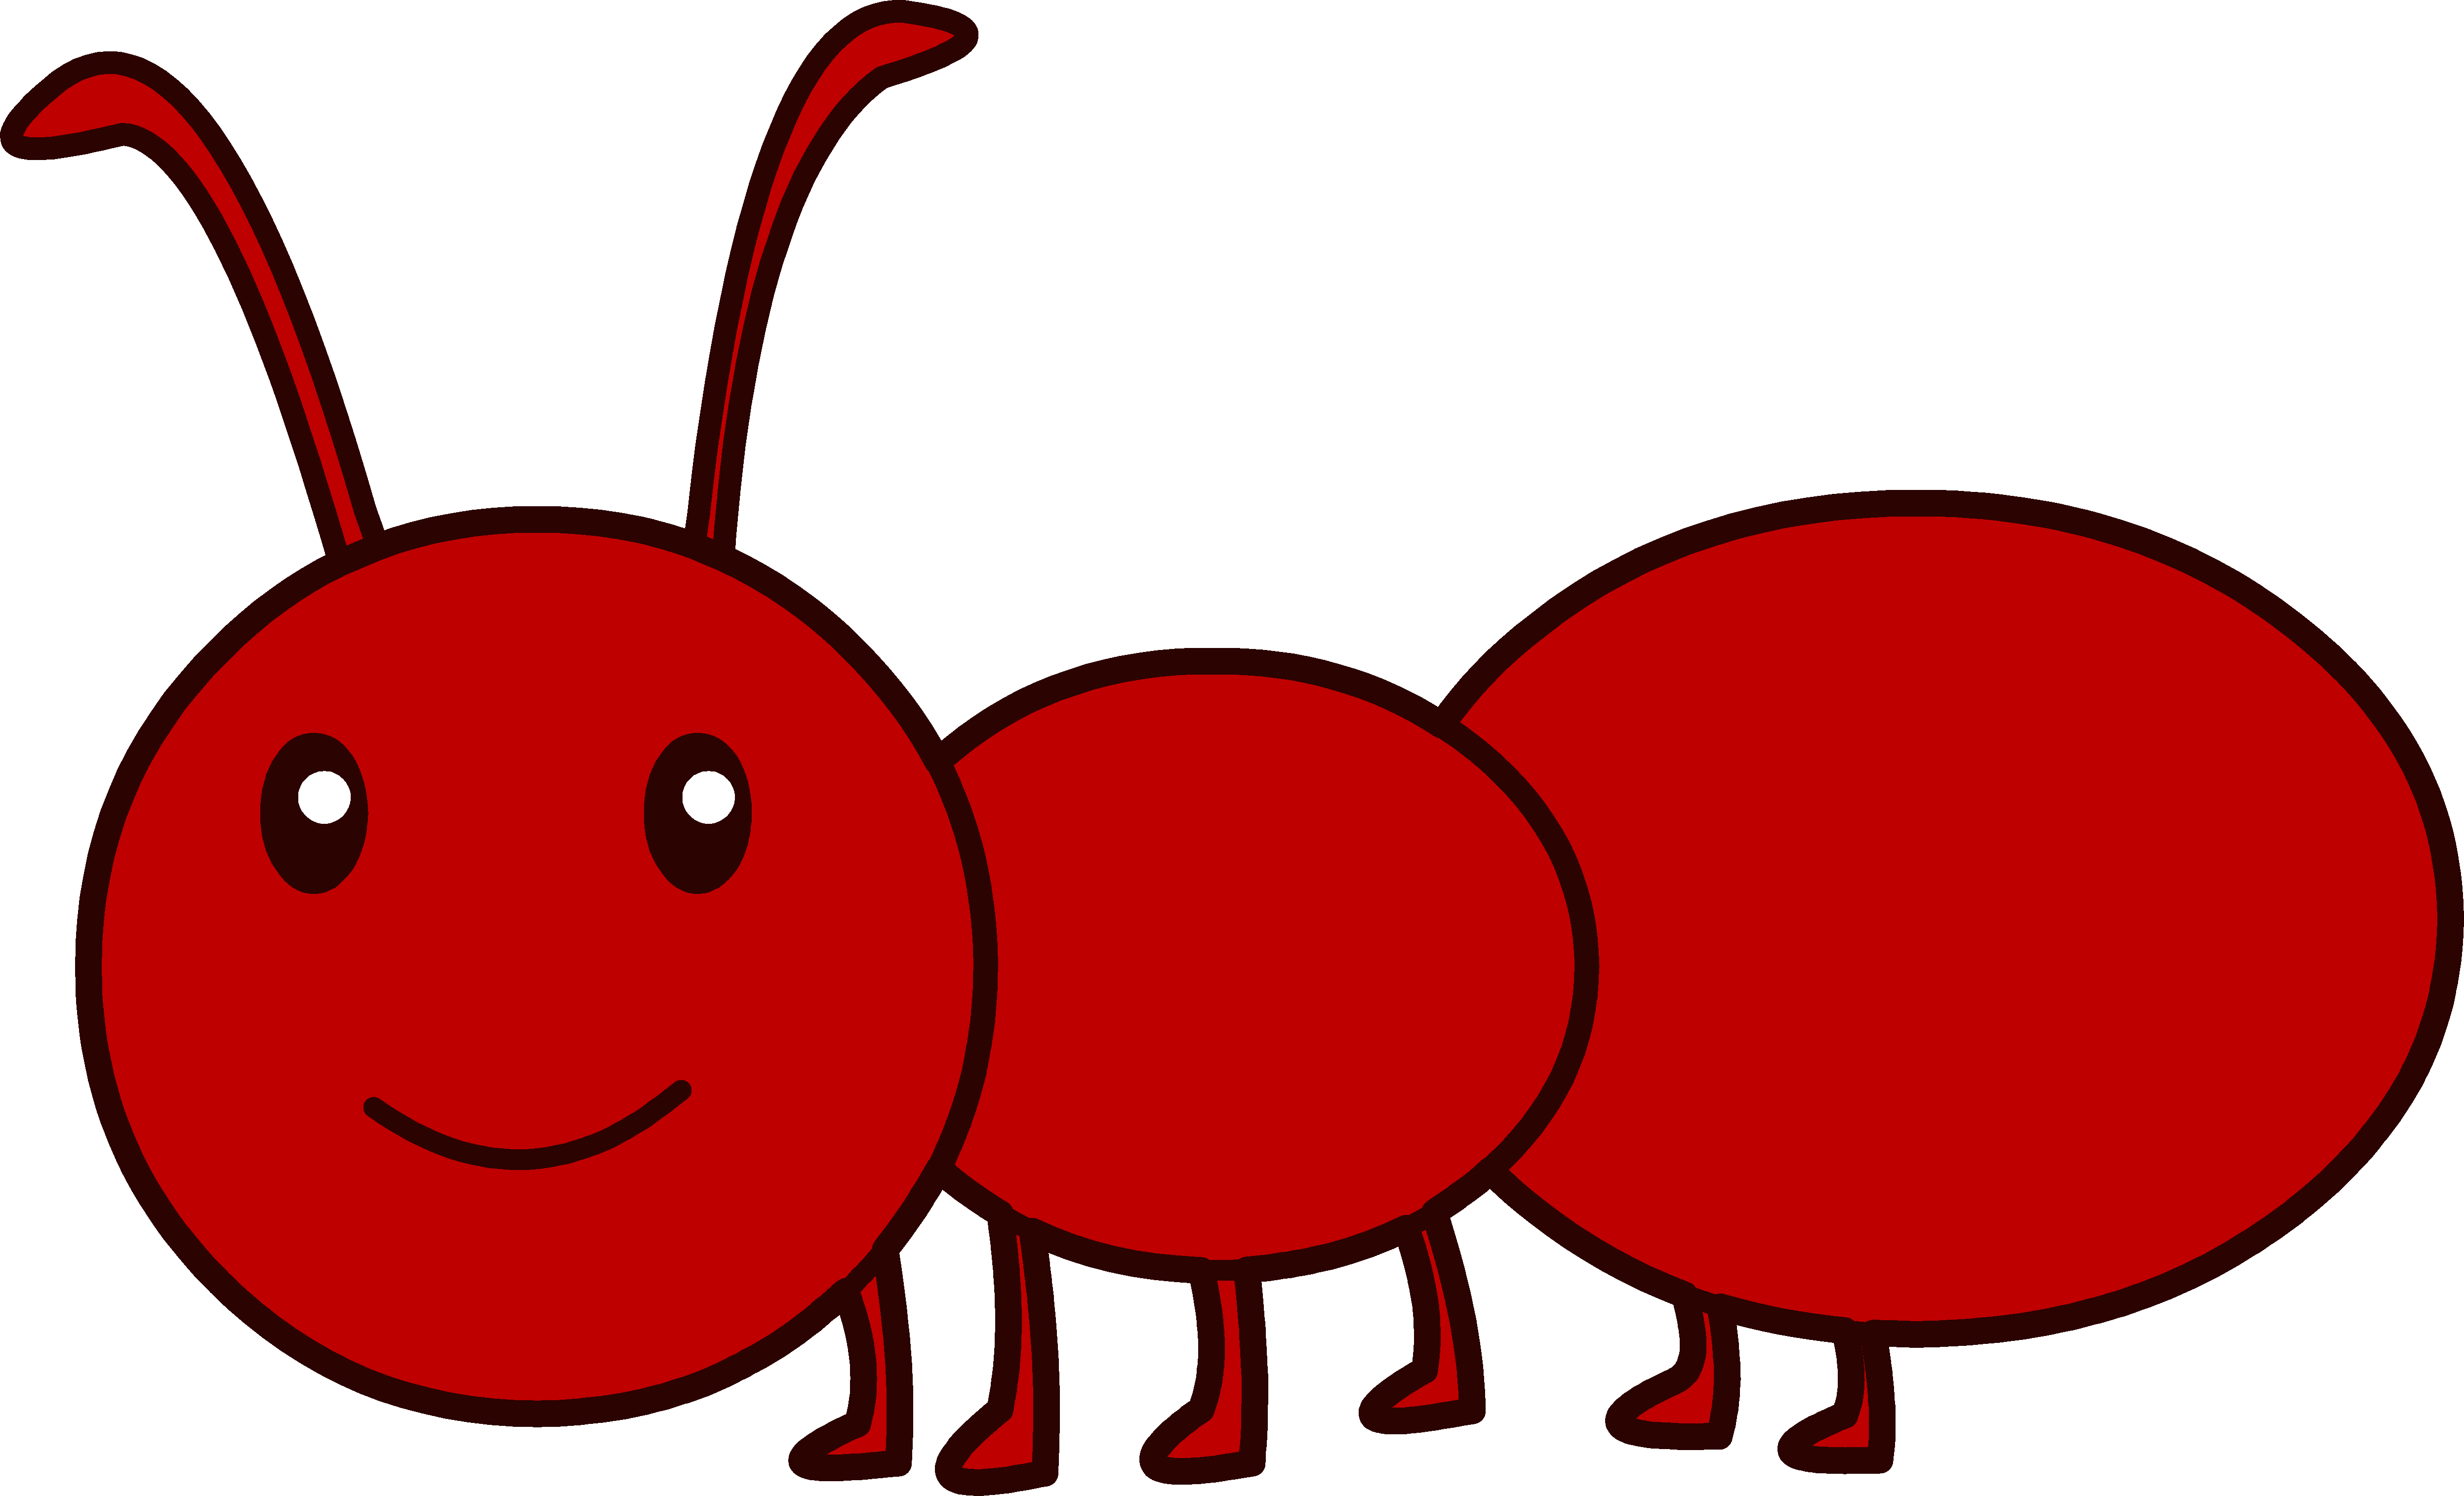 Ants clipart #6, Download drawings